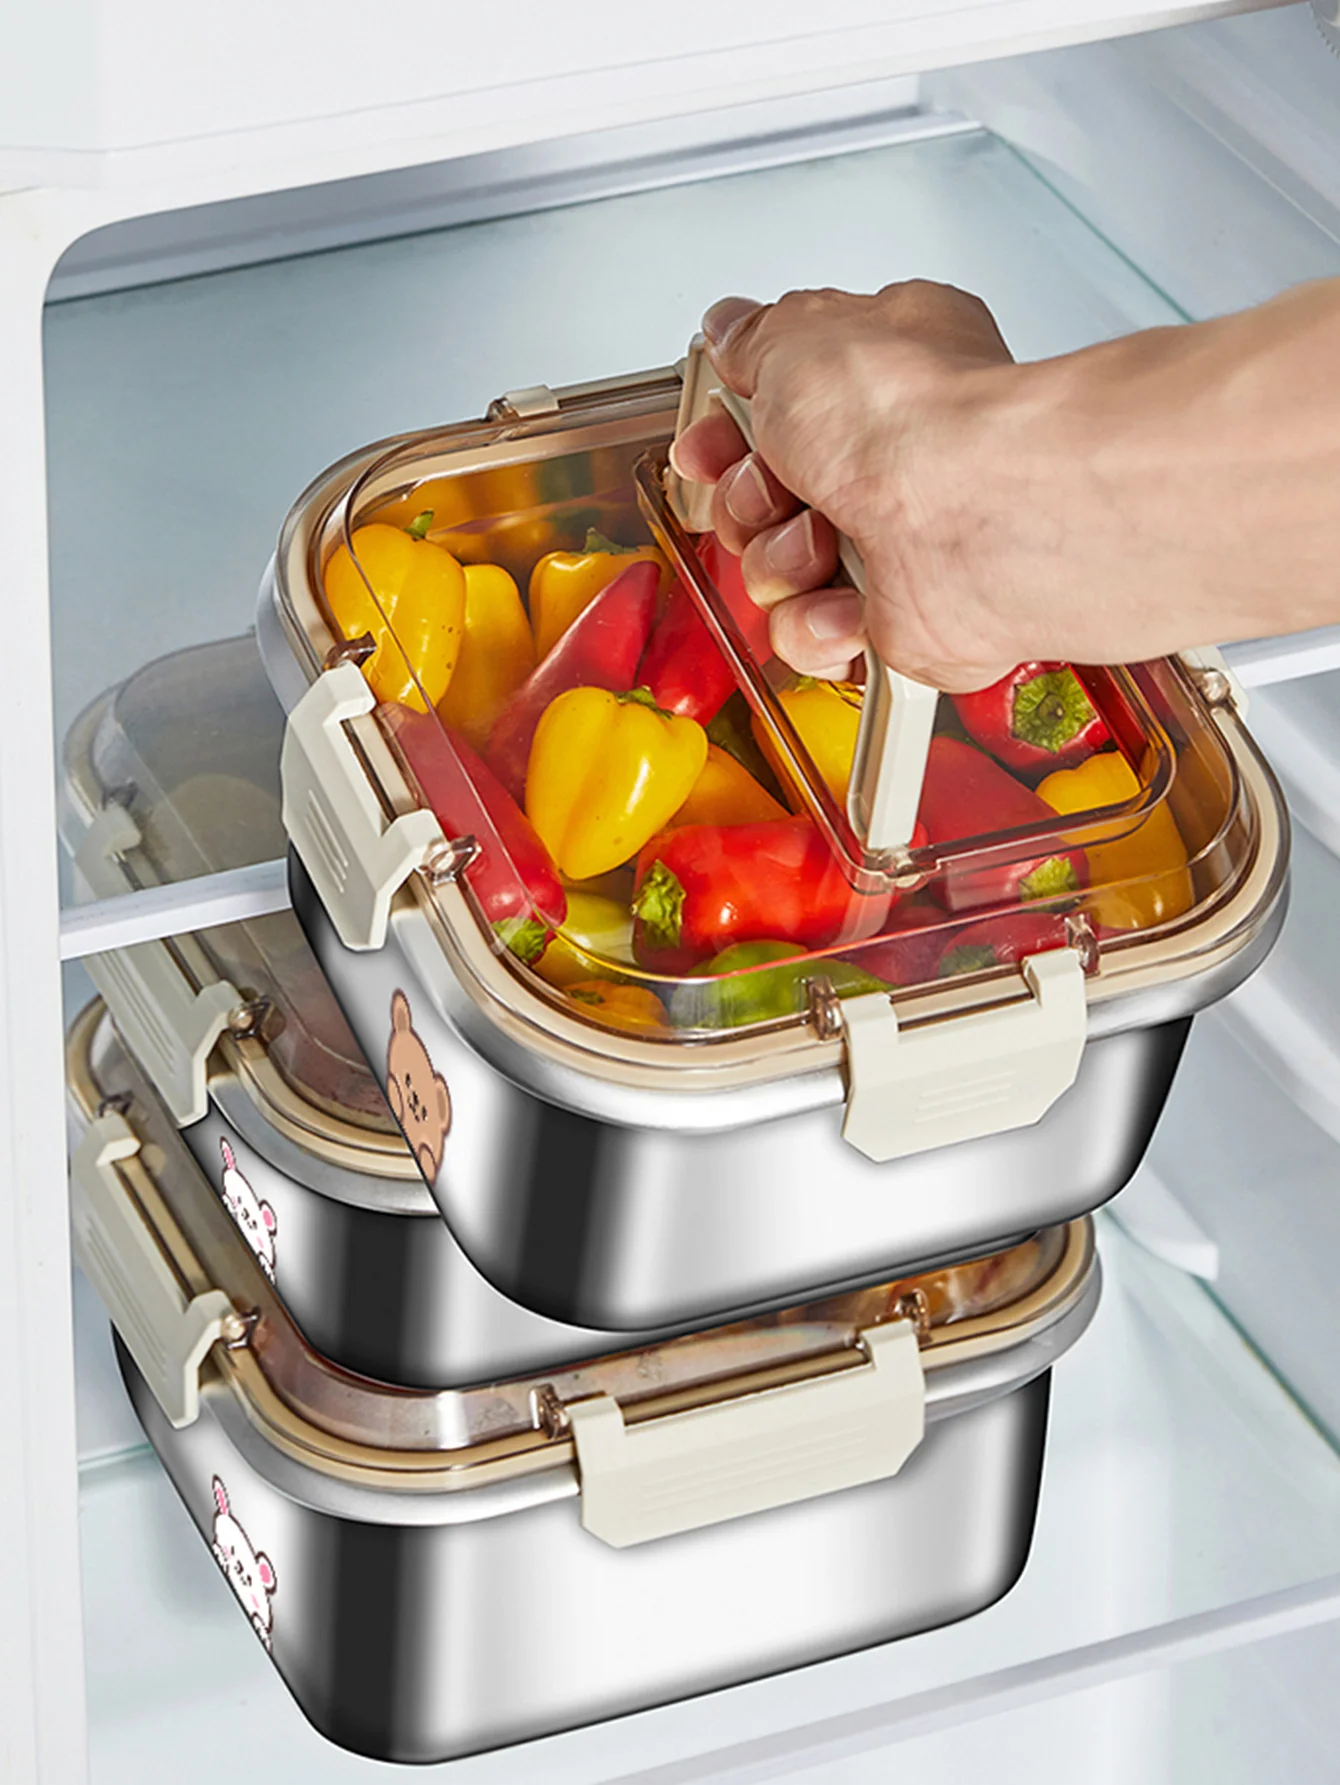 https://ae01.alicdn.com/kf/Sb9da576f3fe74eb88b5f4b575ee85f7fI/WORTHBUY-Vegetable-Fruit-Salad-Storage-Box-With-Handle-Portable-Sealed-Food-Storage-Containers-304-Stainless-Steel.jpg